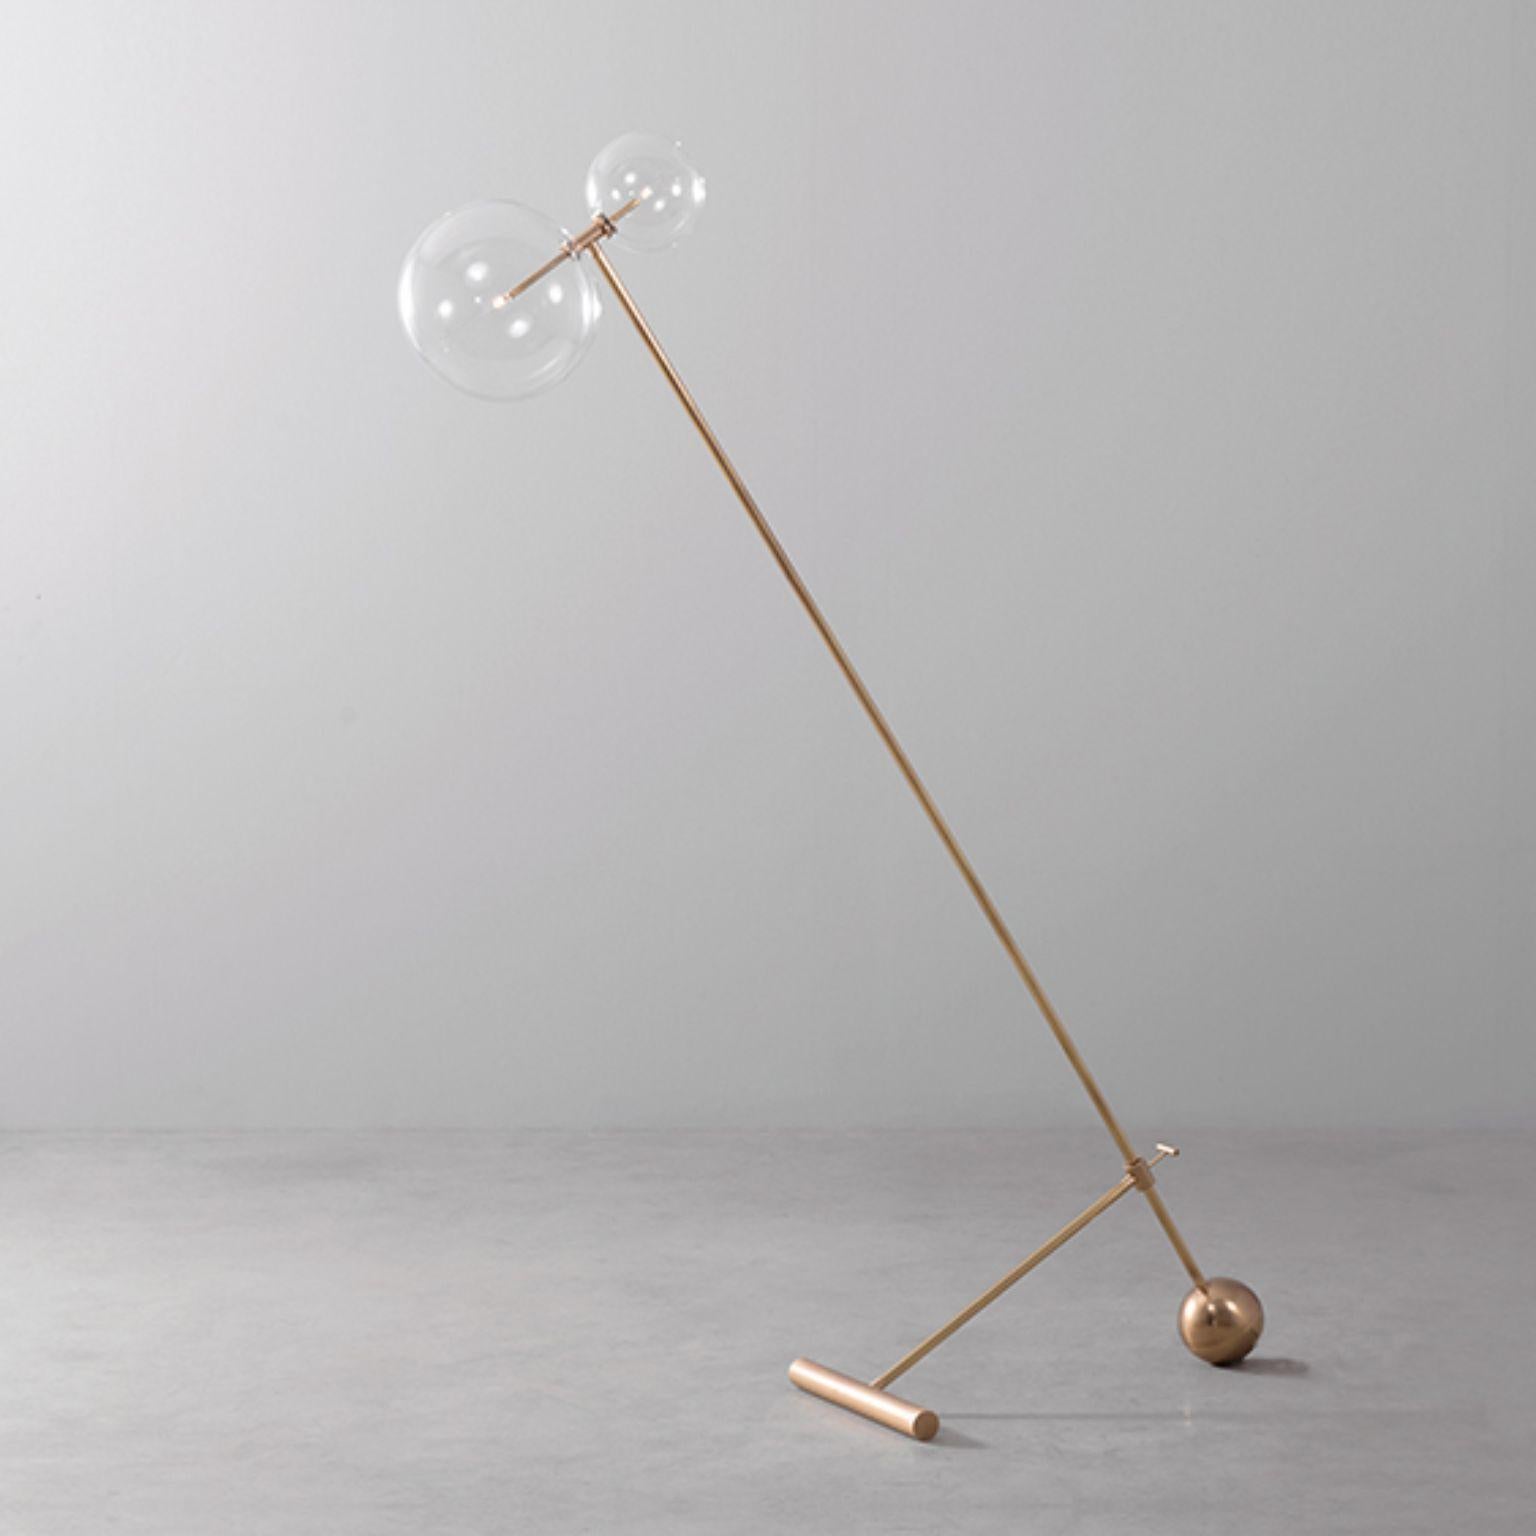 Contemporary brass floor lamp by Schwung
Dimensions: W 35 x D 79 x H 188 cm
Materials: Natural brass, hand blown glass globes
Other finishes available.

Cord 2m with inline on-off switch and plug. Switch location 50cm from the base.
Glass globes